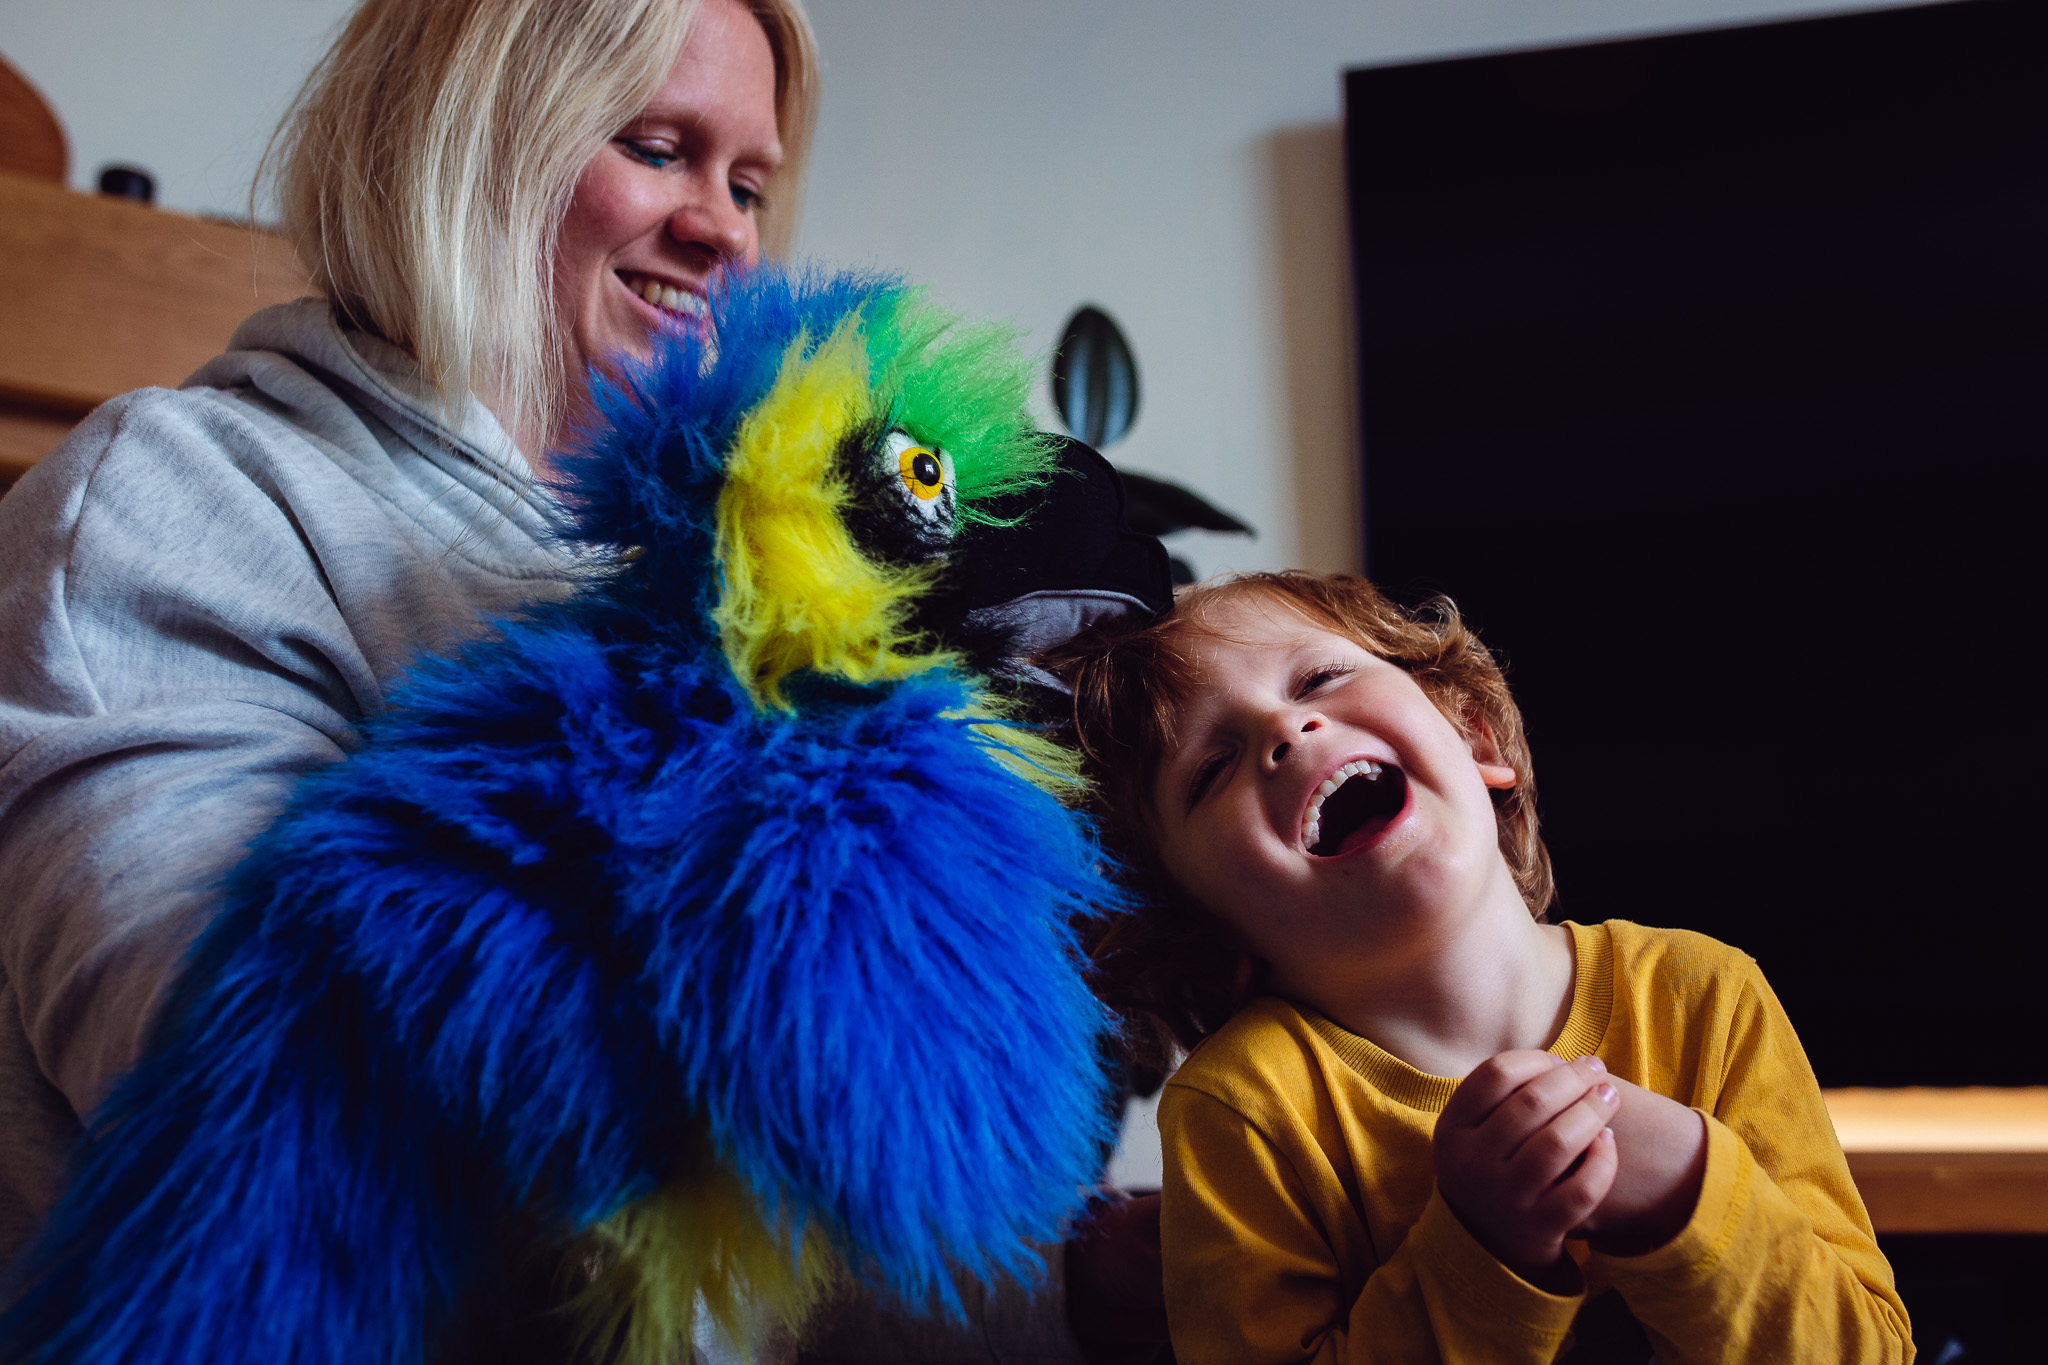 Mum holding a blue parrot hand puppet playing with her laughing son during a family photo session.